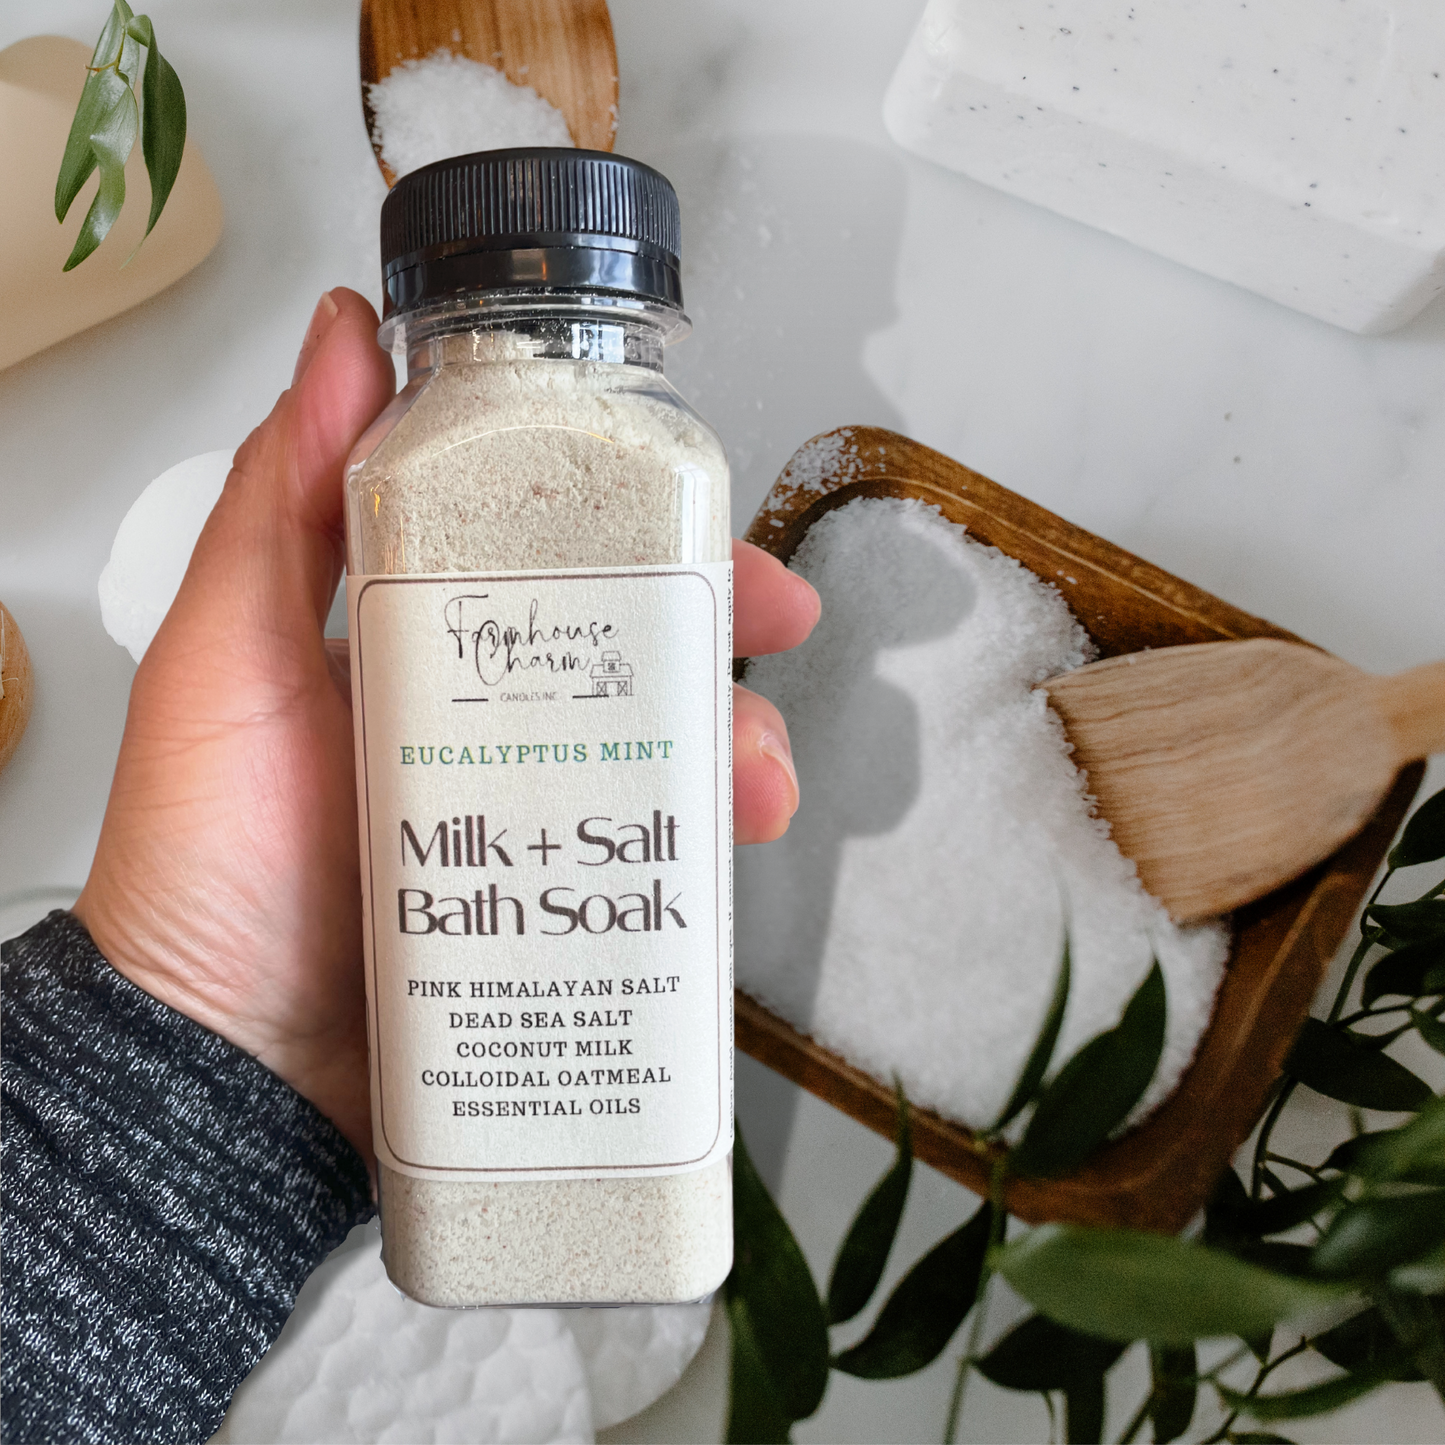 Farmhouse Charm Milk + Salt Bath Soak- Eucalyptus Mint is a  blend of salts, coconut milk and essential oils for a natural and soothing bath experience. It has no artificial colorants and fragrance. Pink Himalayan Salt Dead Sea Salt Colloidal Oatmeal To Use: Add 1/2 cup to bath water. Soak and enjoy!